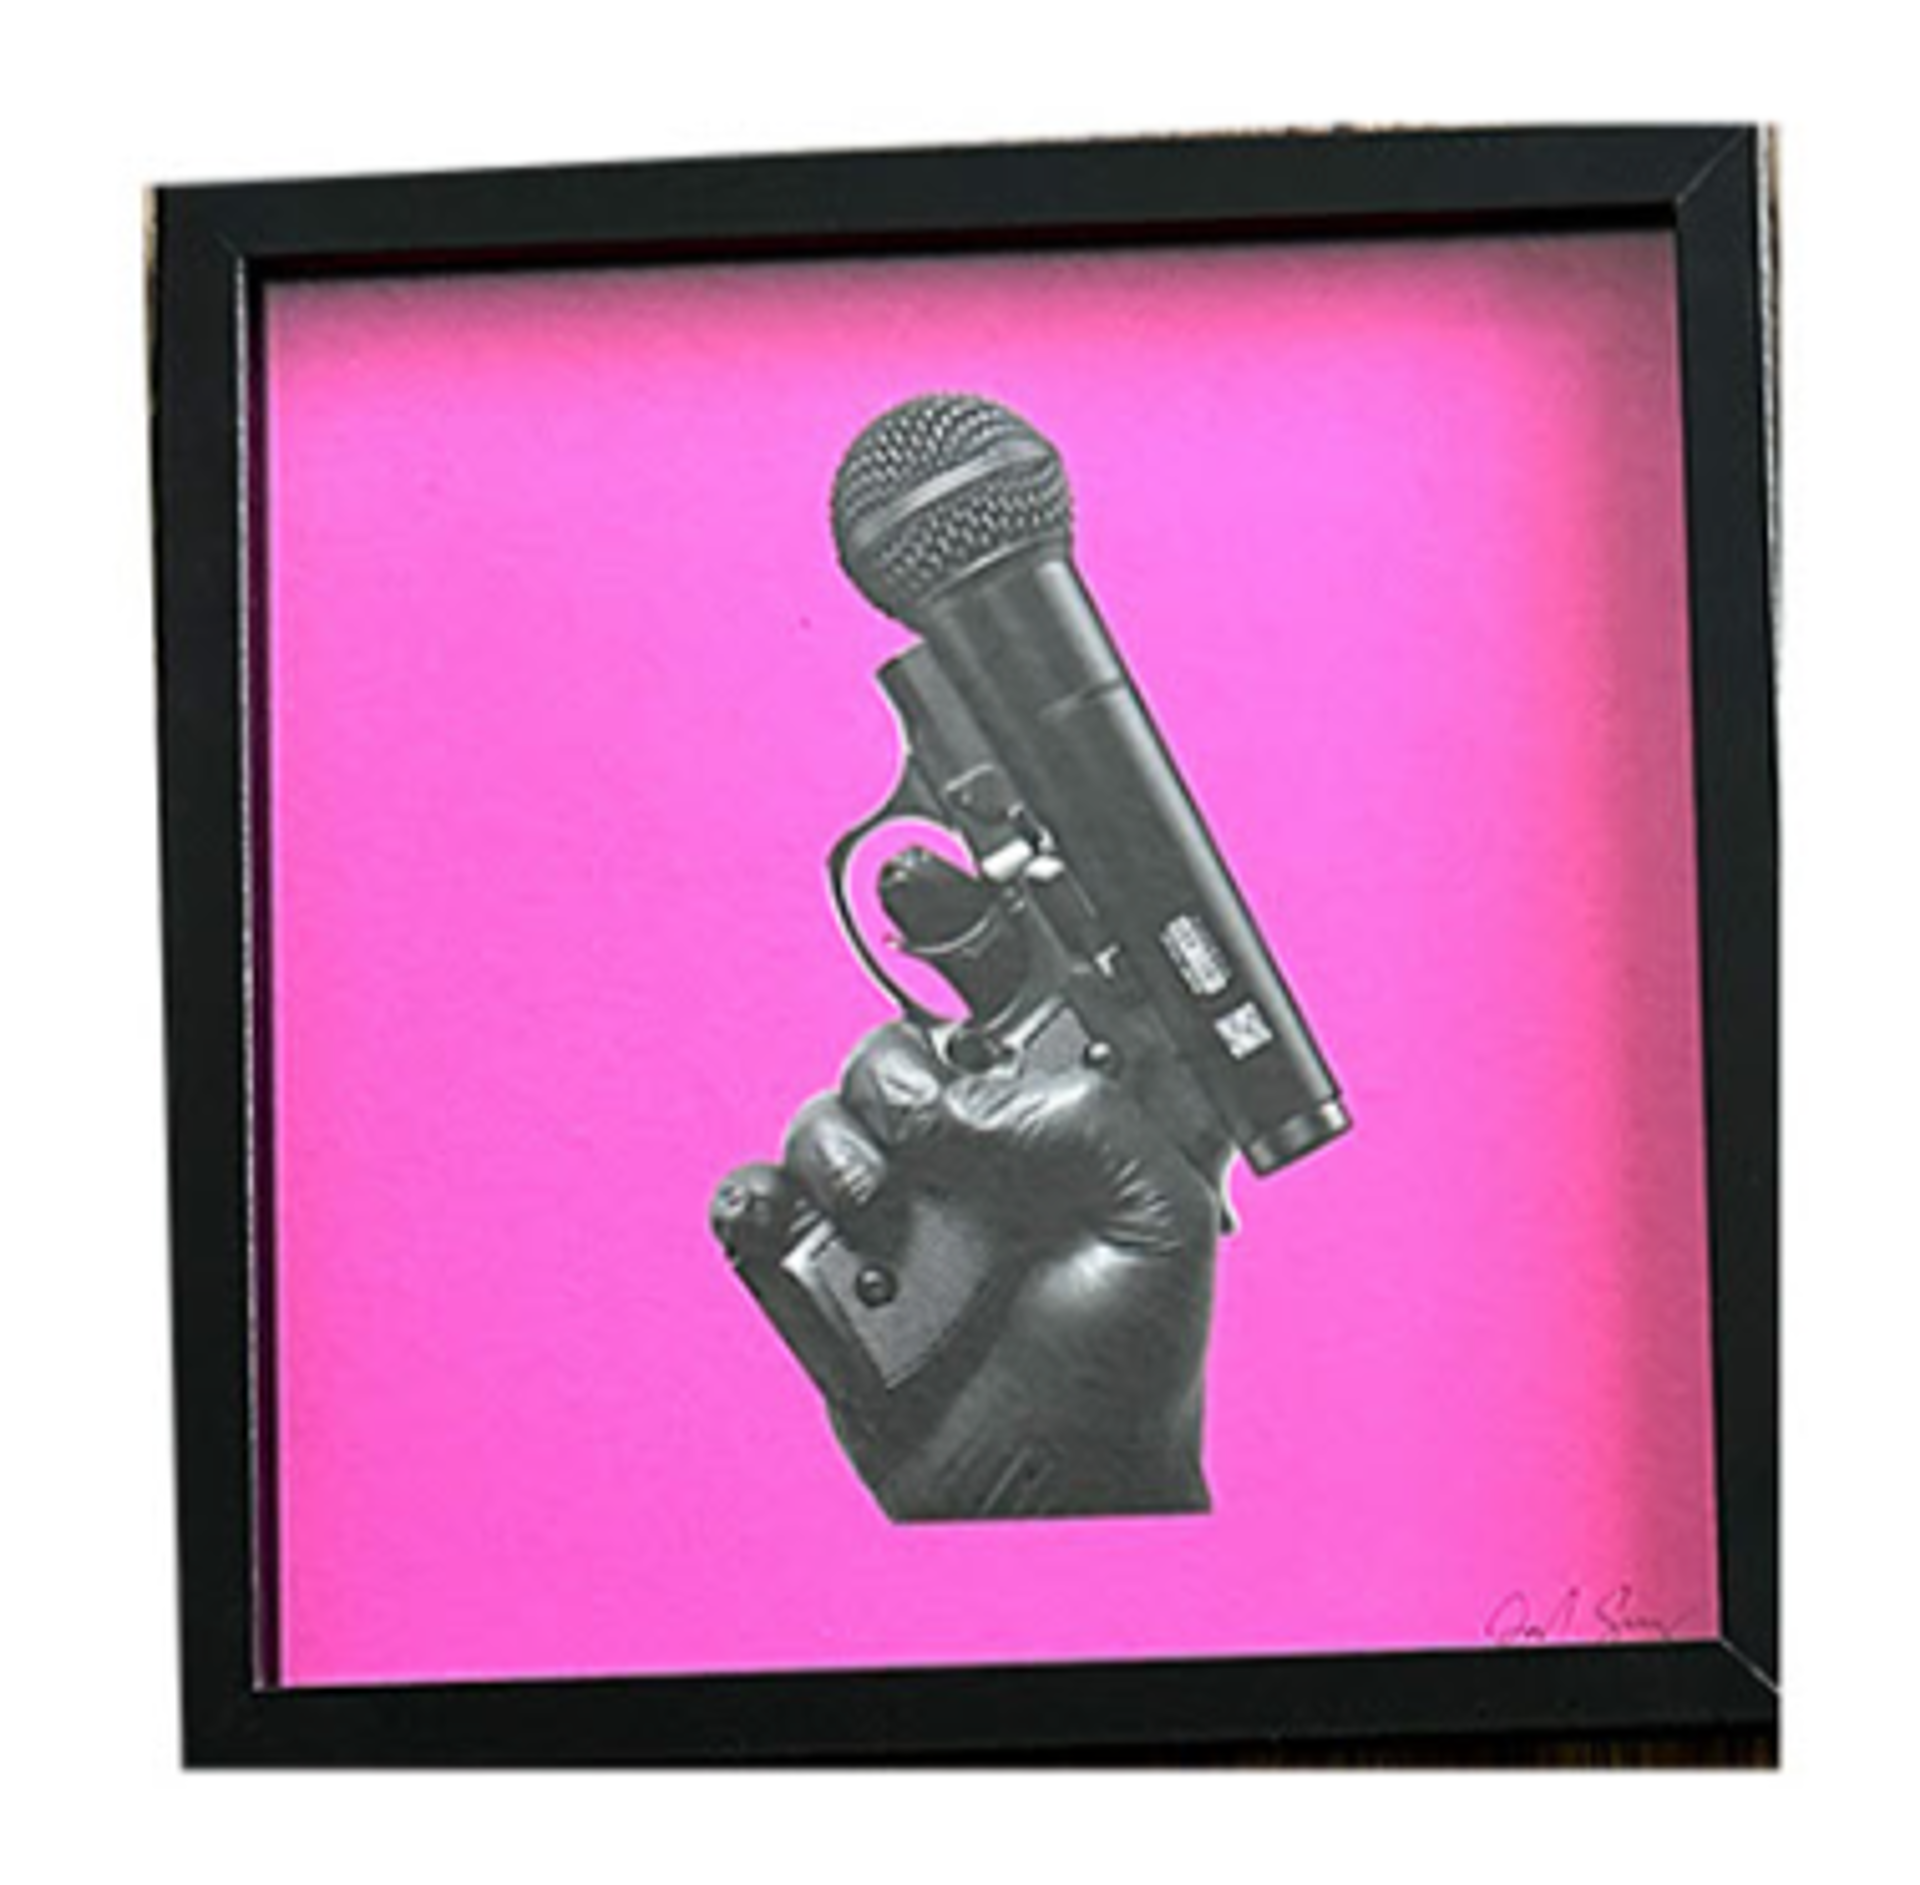 The Tongue is Mightier Than the Gun (pink & black) by David Schwartz